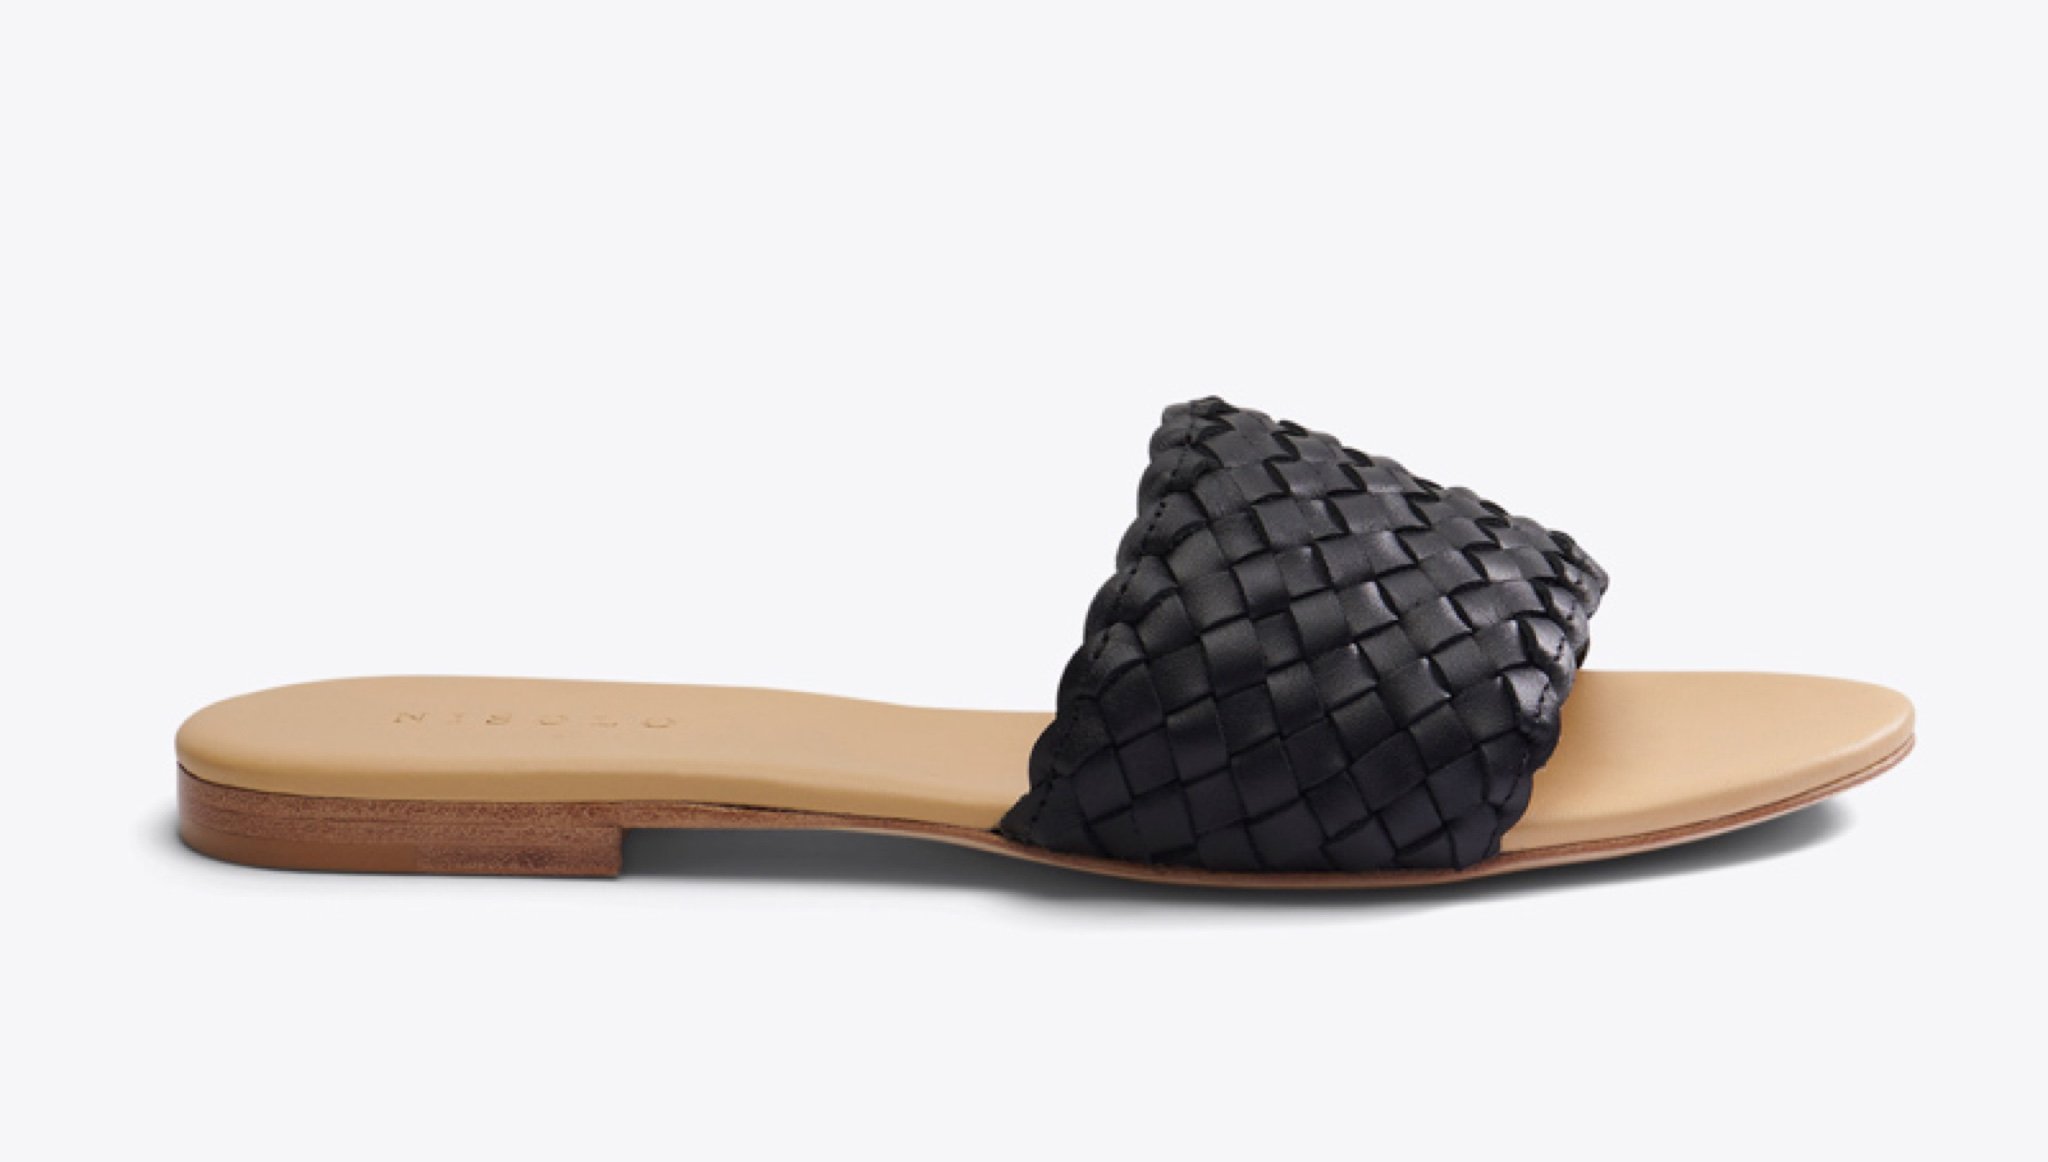 Nisolo Isla Woven Slide Sandal Woven Black - Every Nisolo product is built on the foundation of comfort, function, and design. 